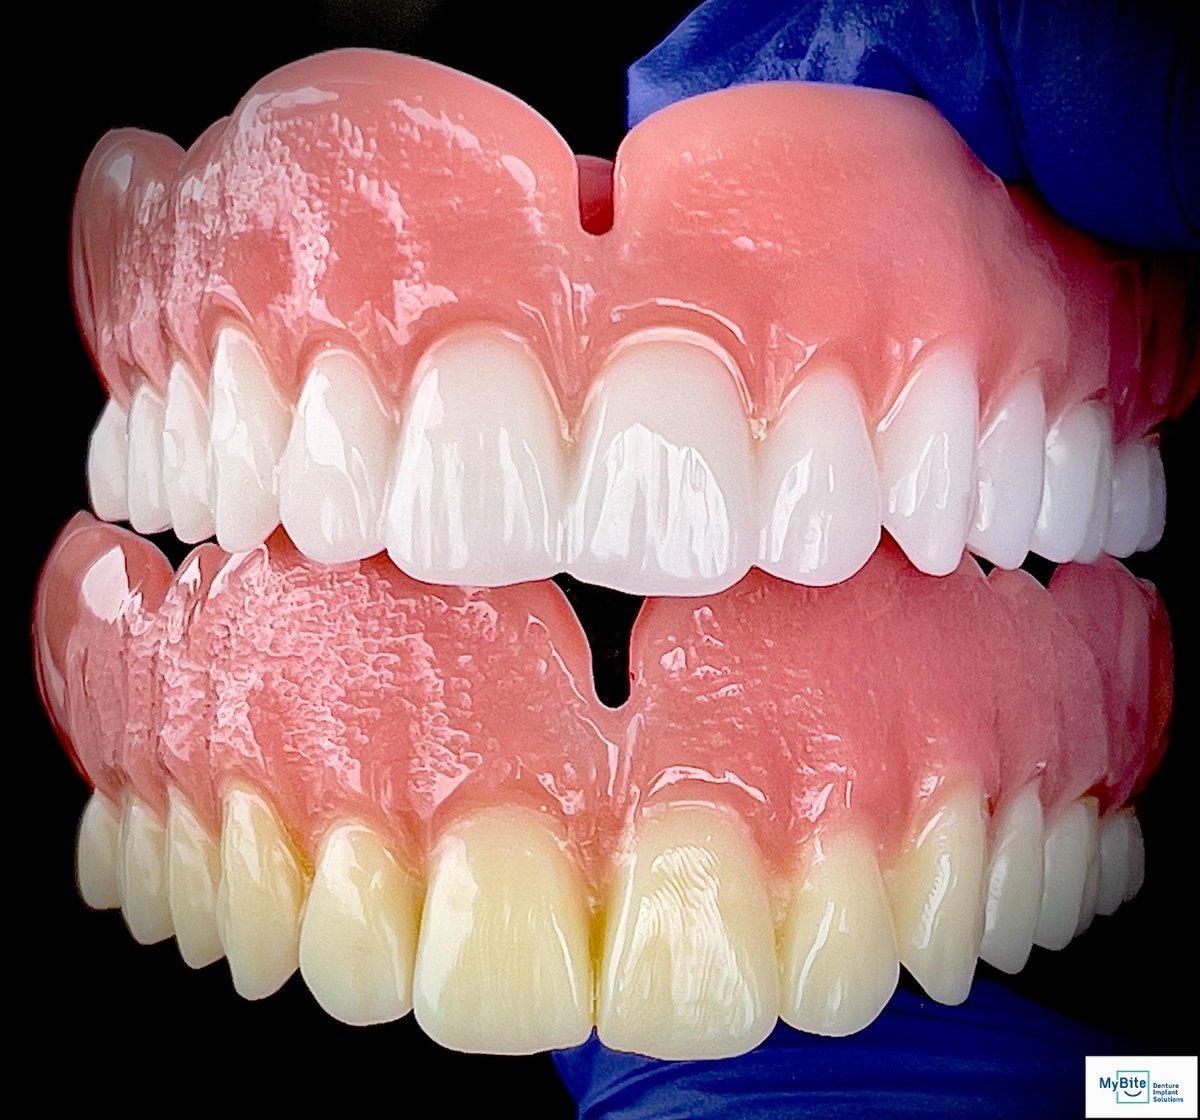 🌟Milled vs 3D Printed: Can you guess which one is milled vs 3D printed? 👀 💎 Which do you prefer? Let us know in the comments! 💬 #milledvs3Dprinte d#dentaltechnology #beautifulsmiles #dentures #yycdentures #calgary #yyc #milled #3dprinted #yycdenturegang